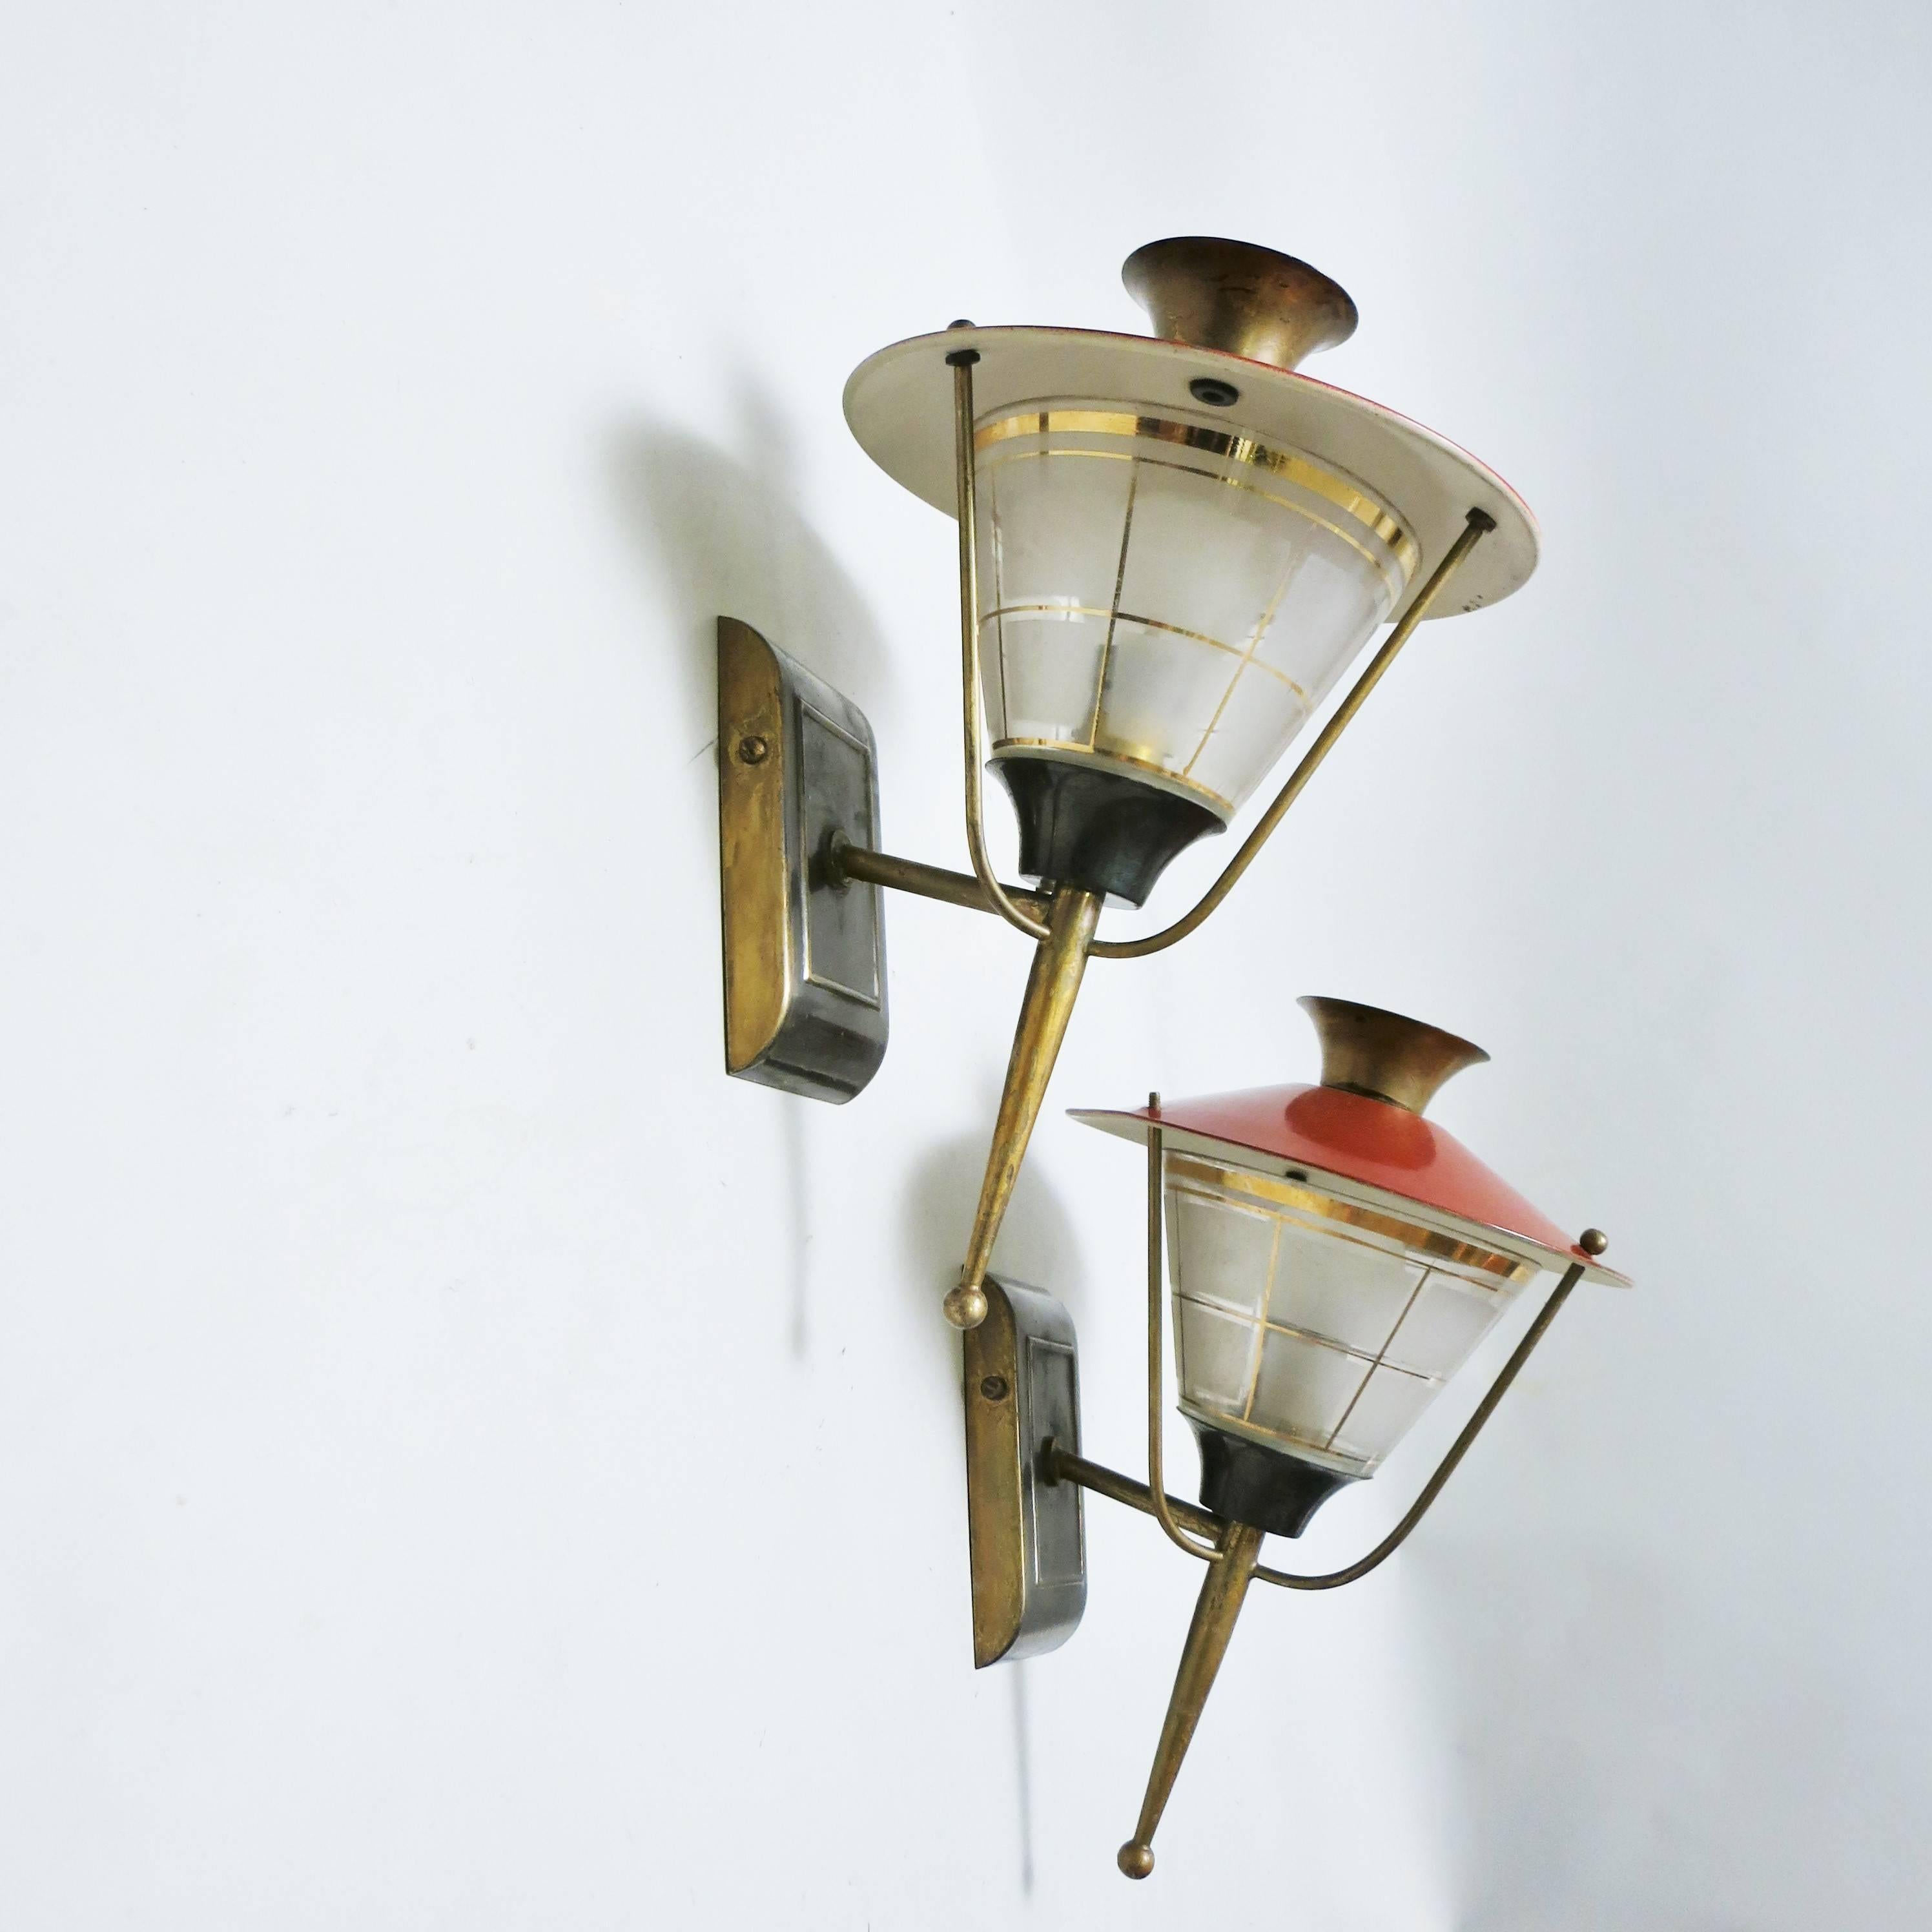 A pair of vintage 1950s French wall-mounted lantern-form fixtures in brass, metal lacquered red, glass attributed to Lunel.